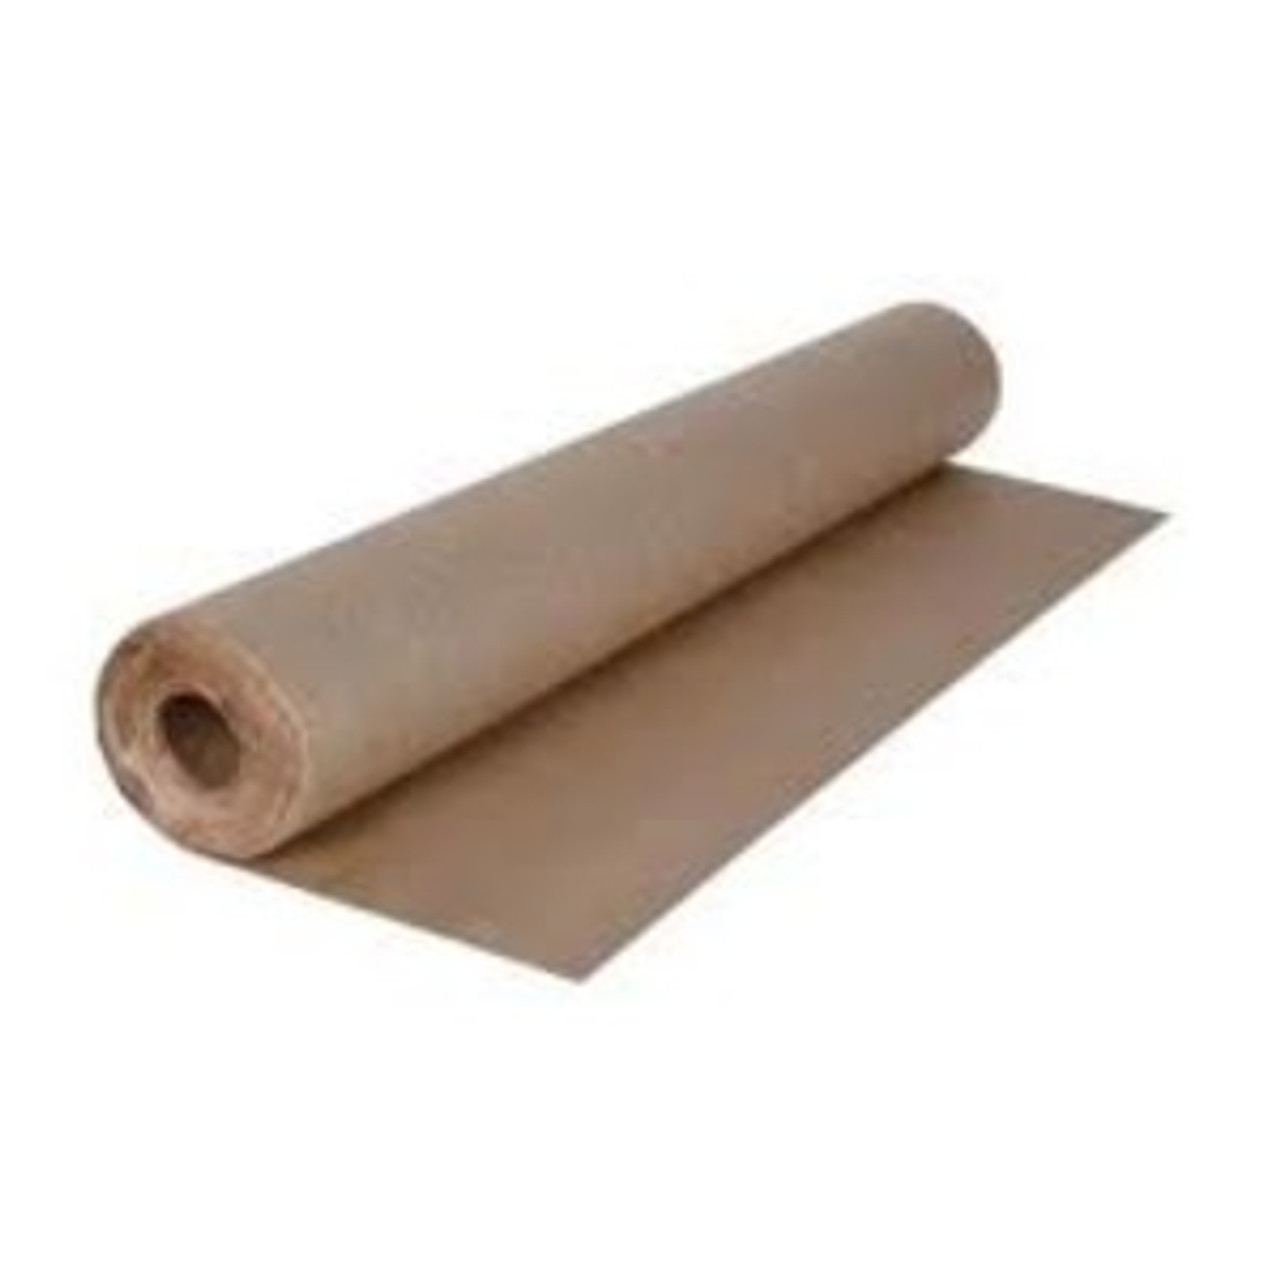 Surface Shields KP35144 Floor Protection Paper, 35 in. x 144 ft, Natural:  Paint Drop Cloths: : Tools & Home Improvement